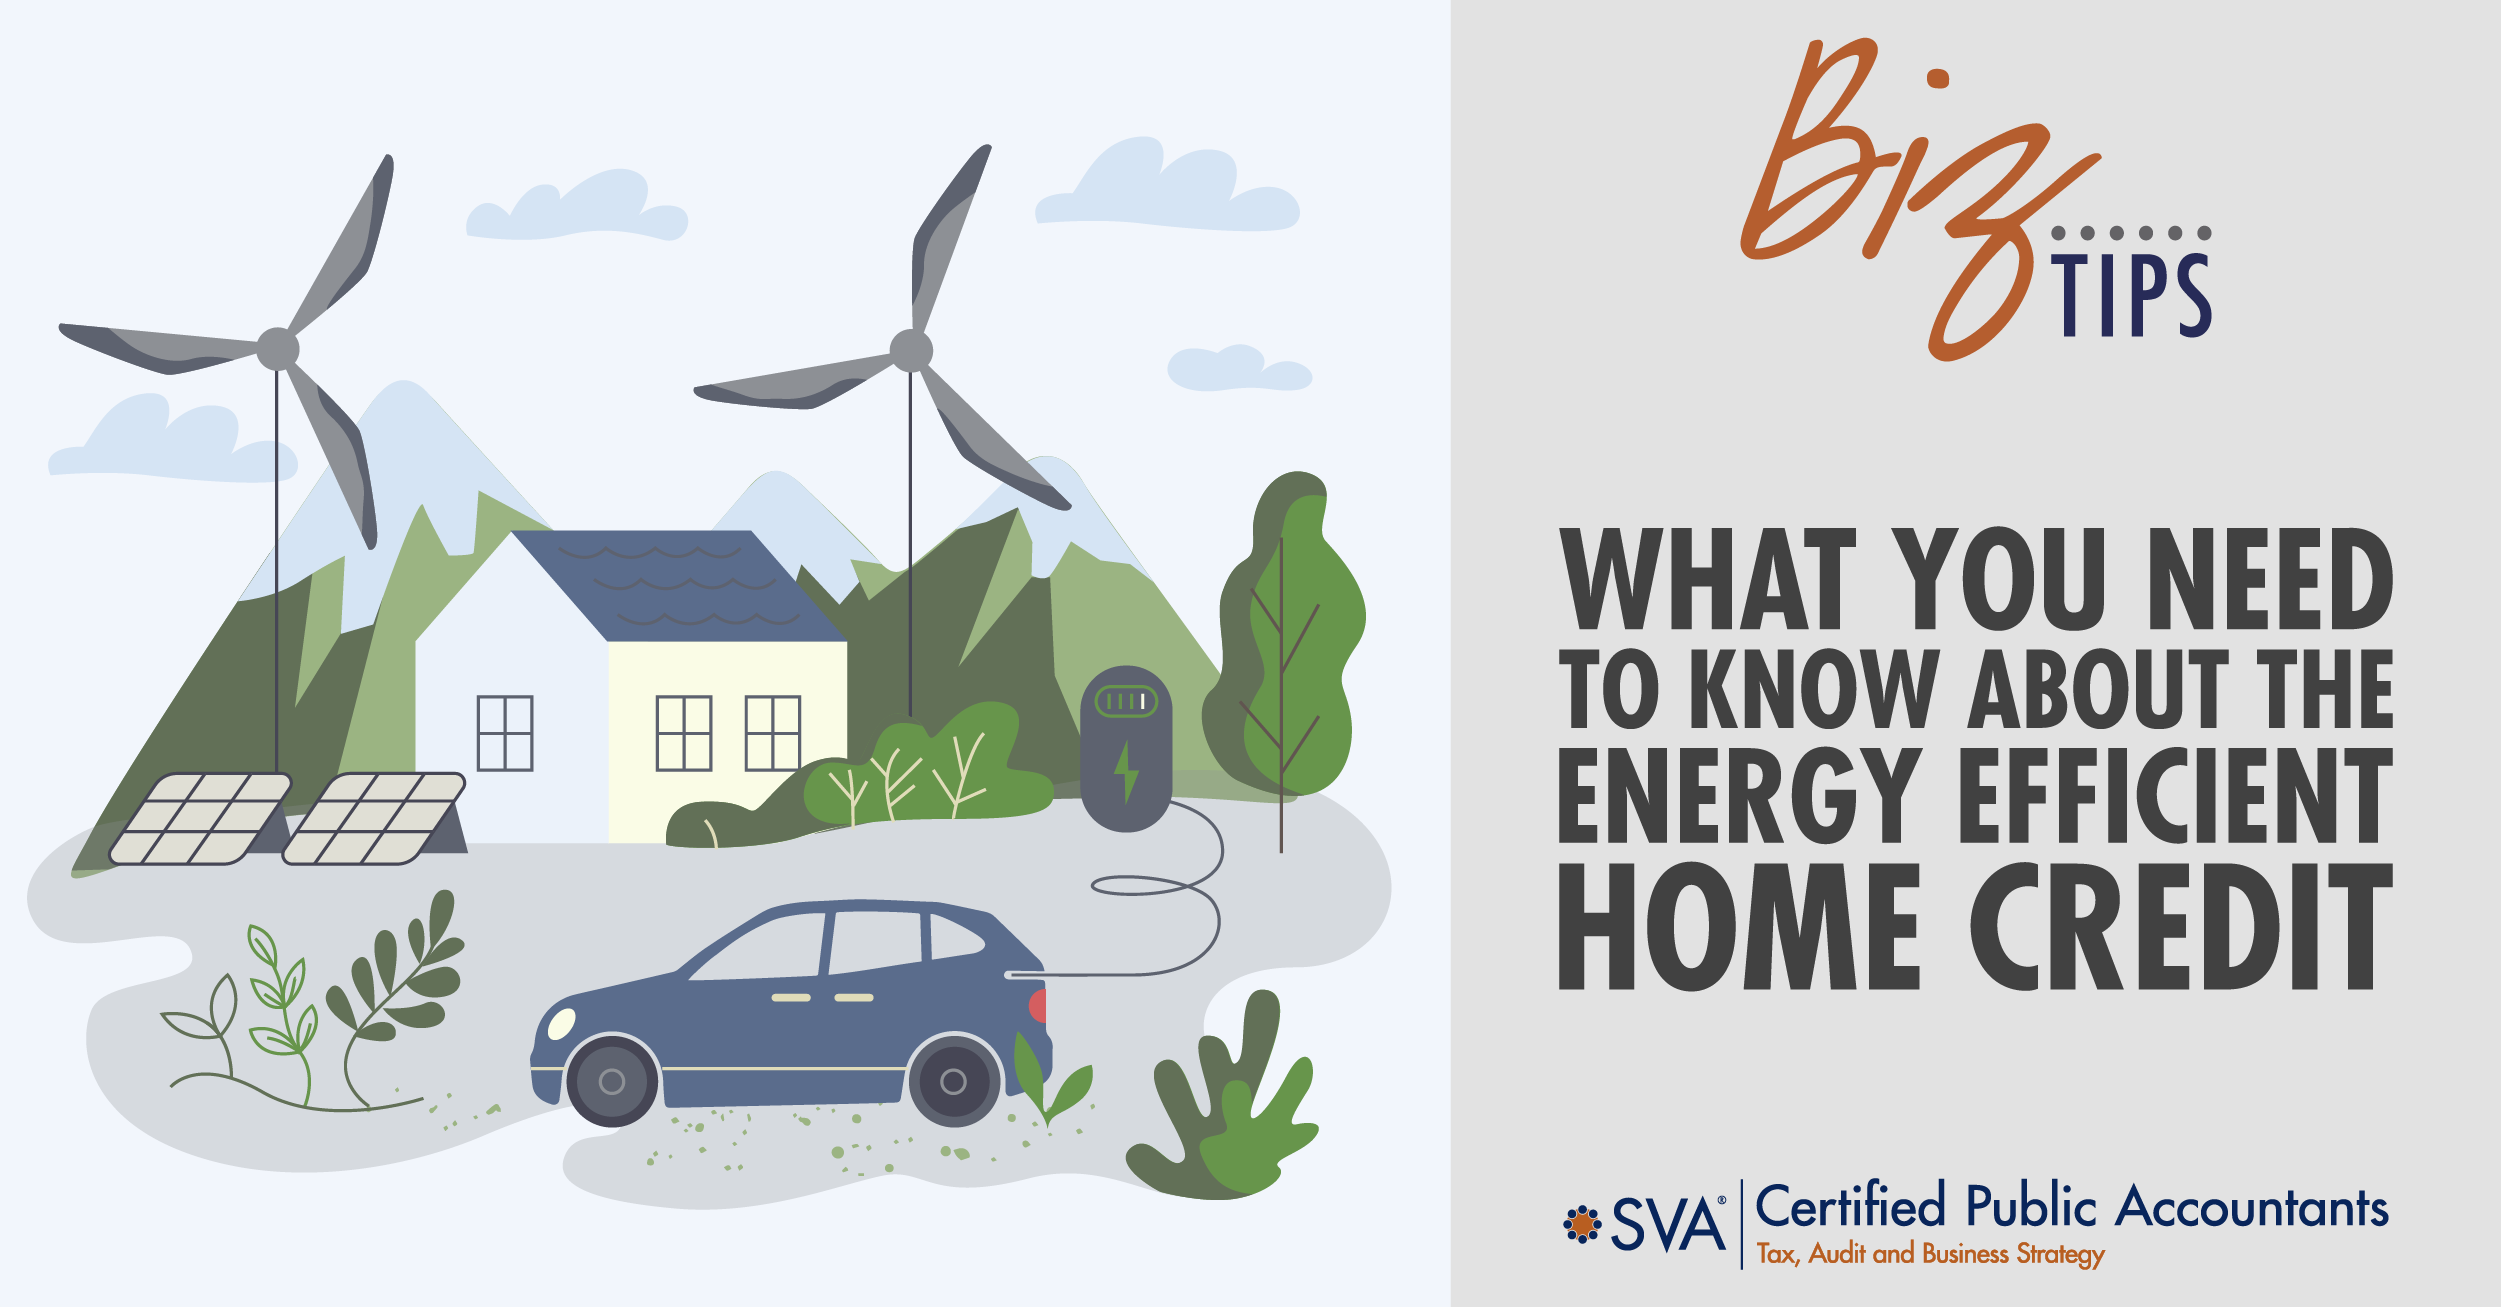 sva-certified-public-accountants-biz-tips-what-you-need-to-know-about-the-energy-efficient-home-credit